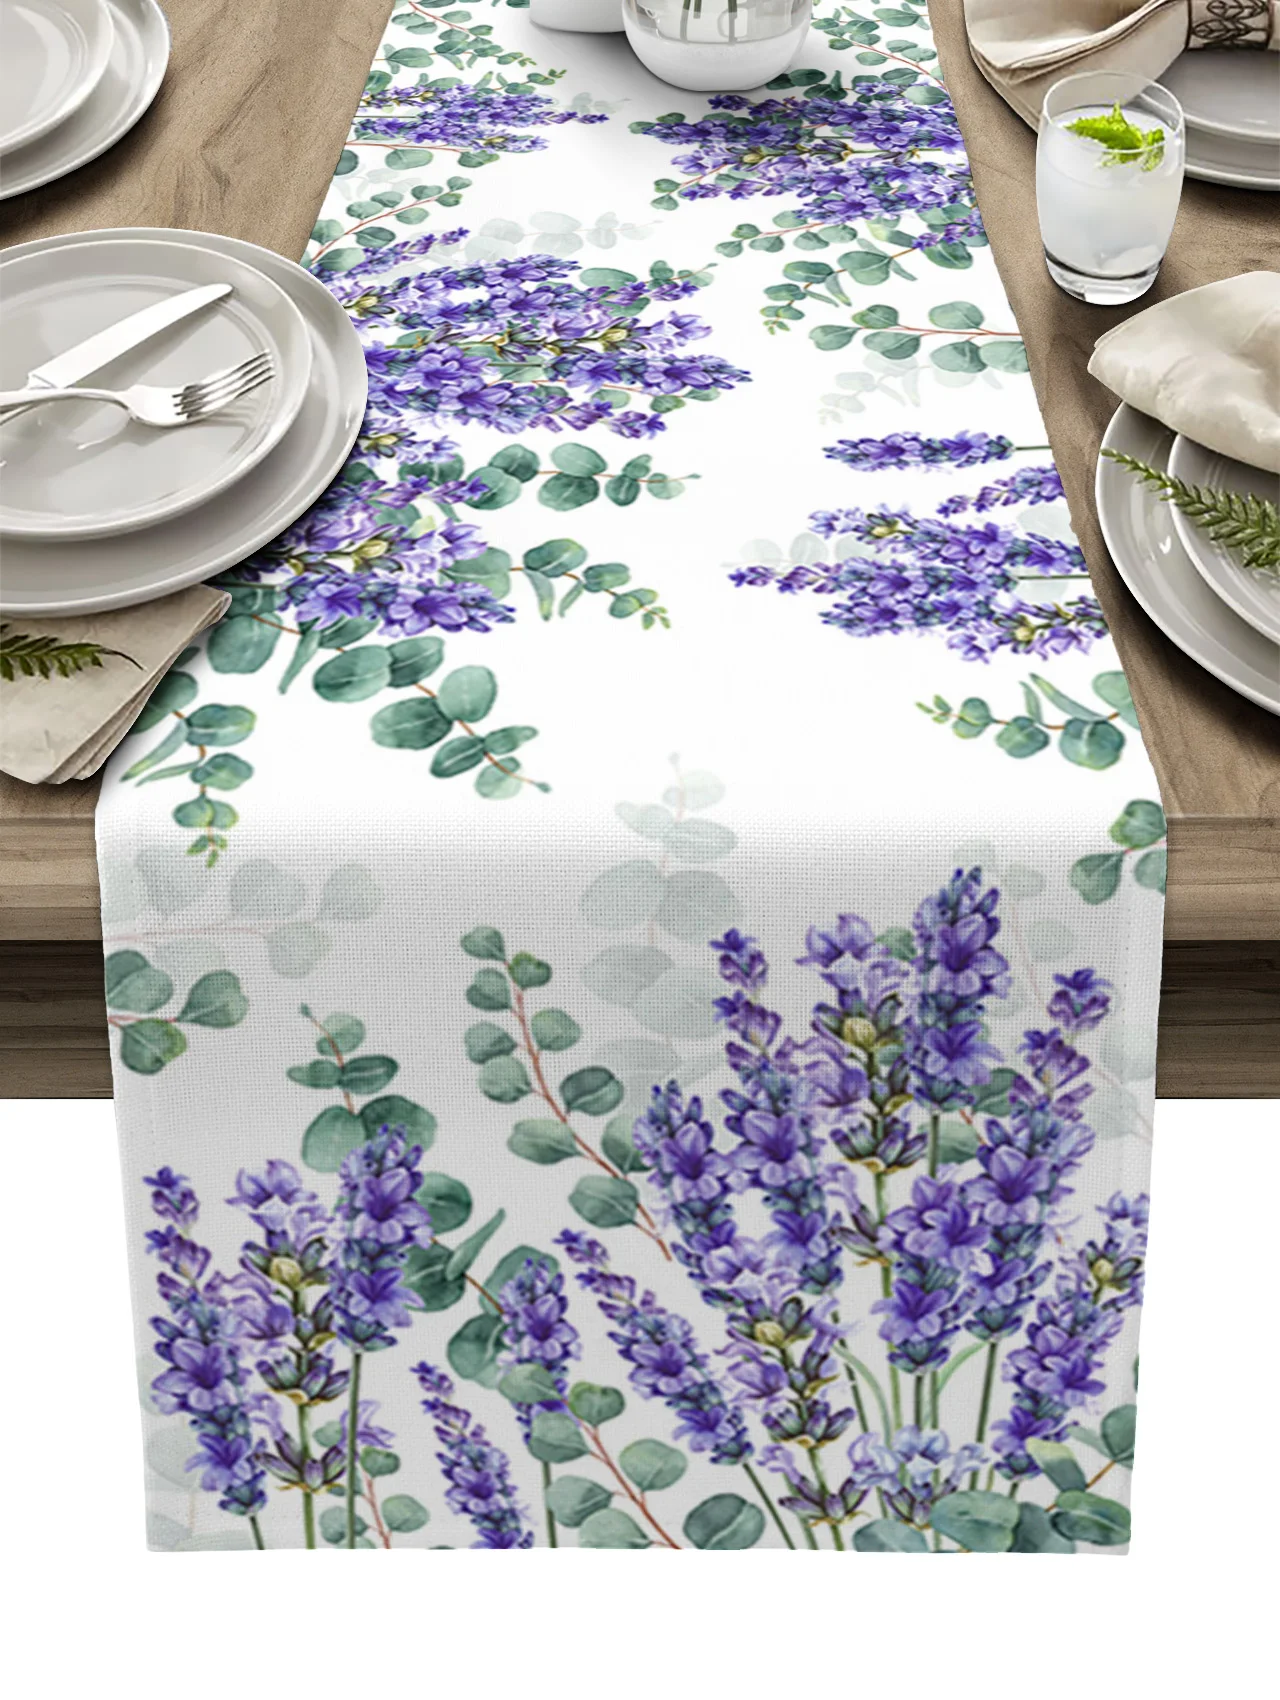 

Eucalyptus Rustic Leaves Flower Lavender Wedding Decor Table Runners Coffee Table Kitchen Dining Table Cloths Home Party Decor